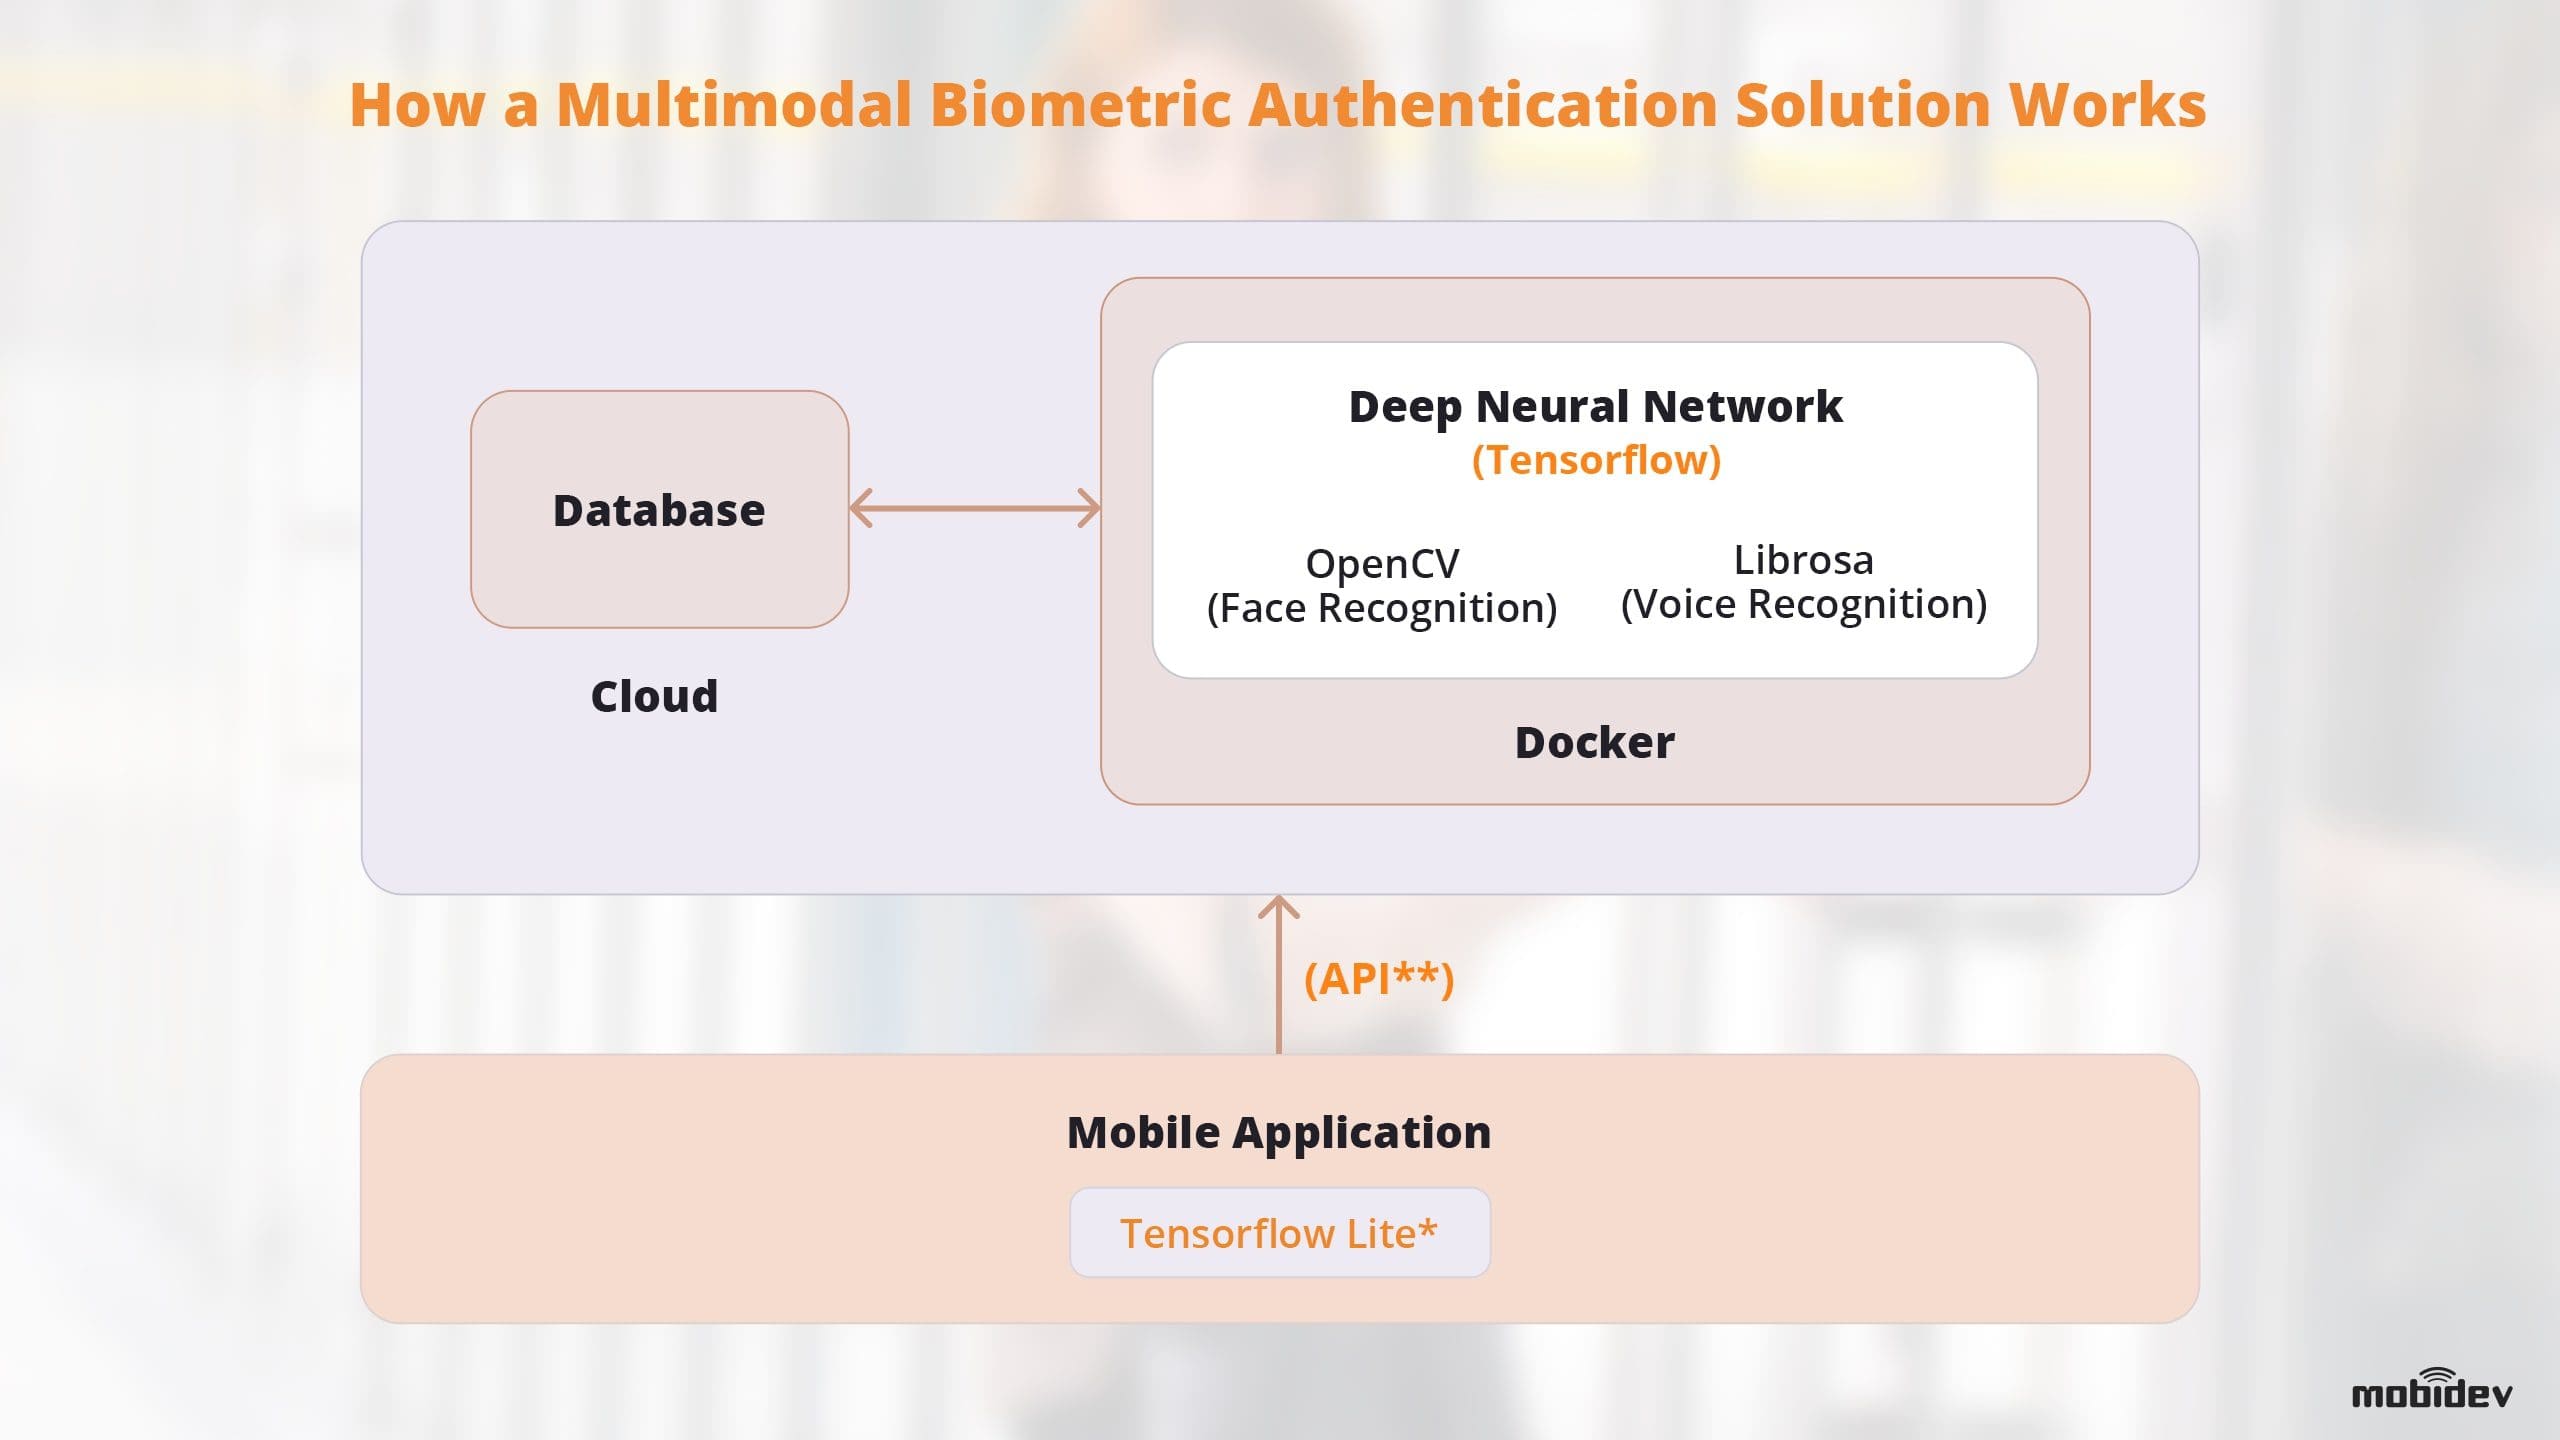 How Multimodal Biometric Authentication Solutions Work